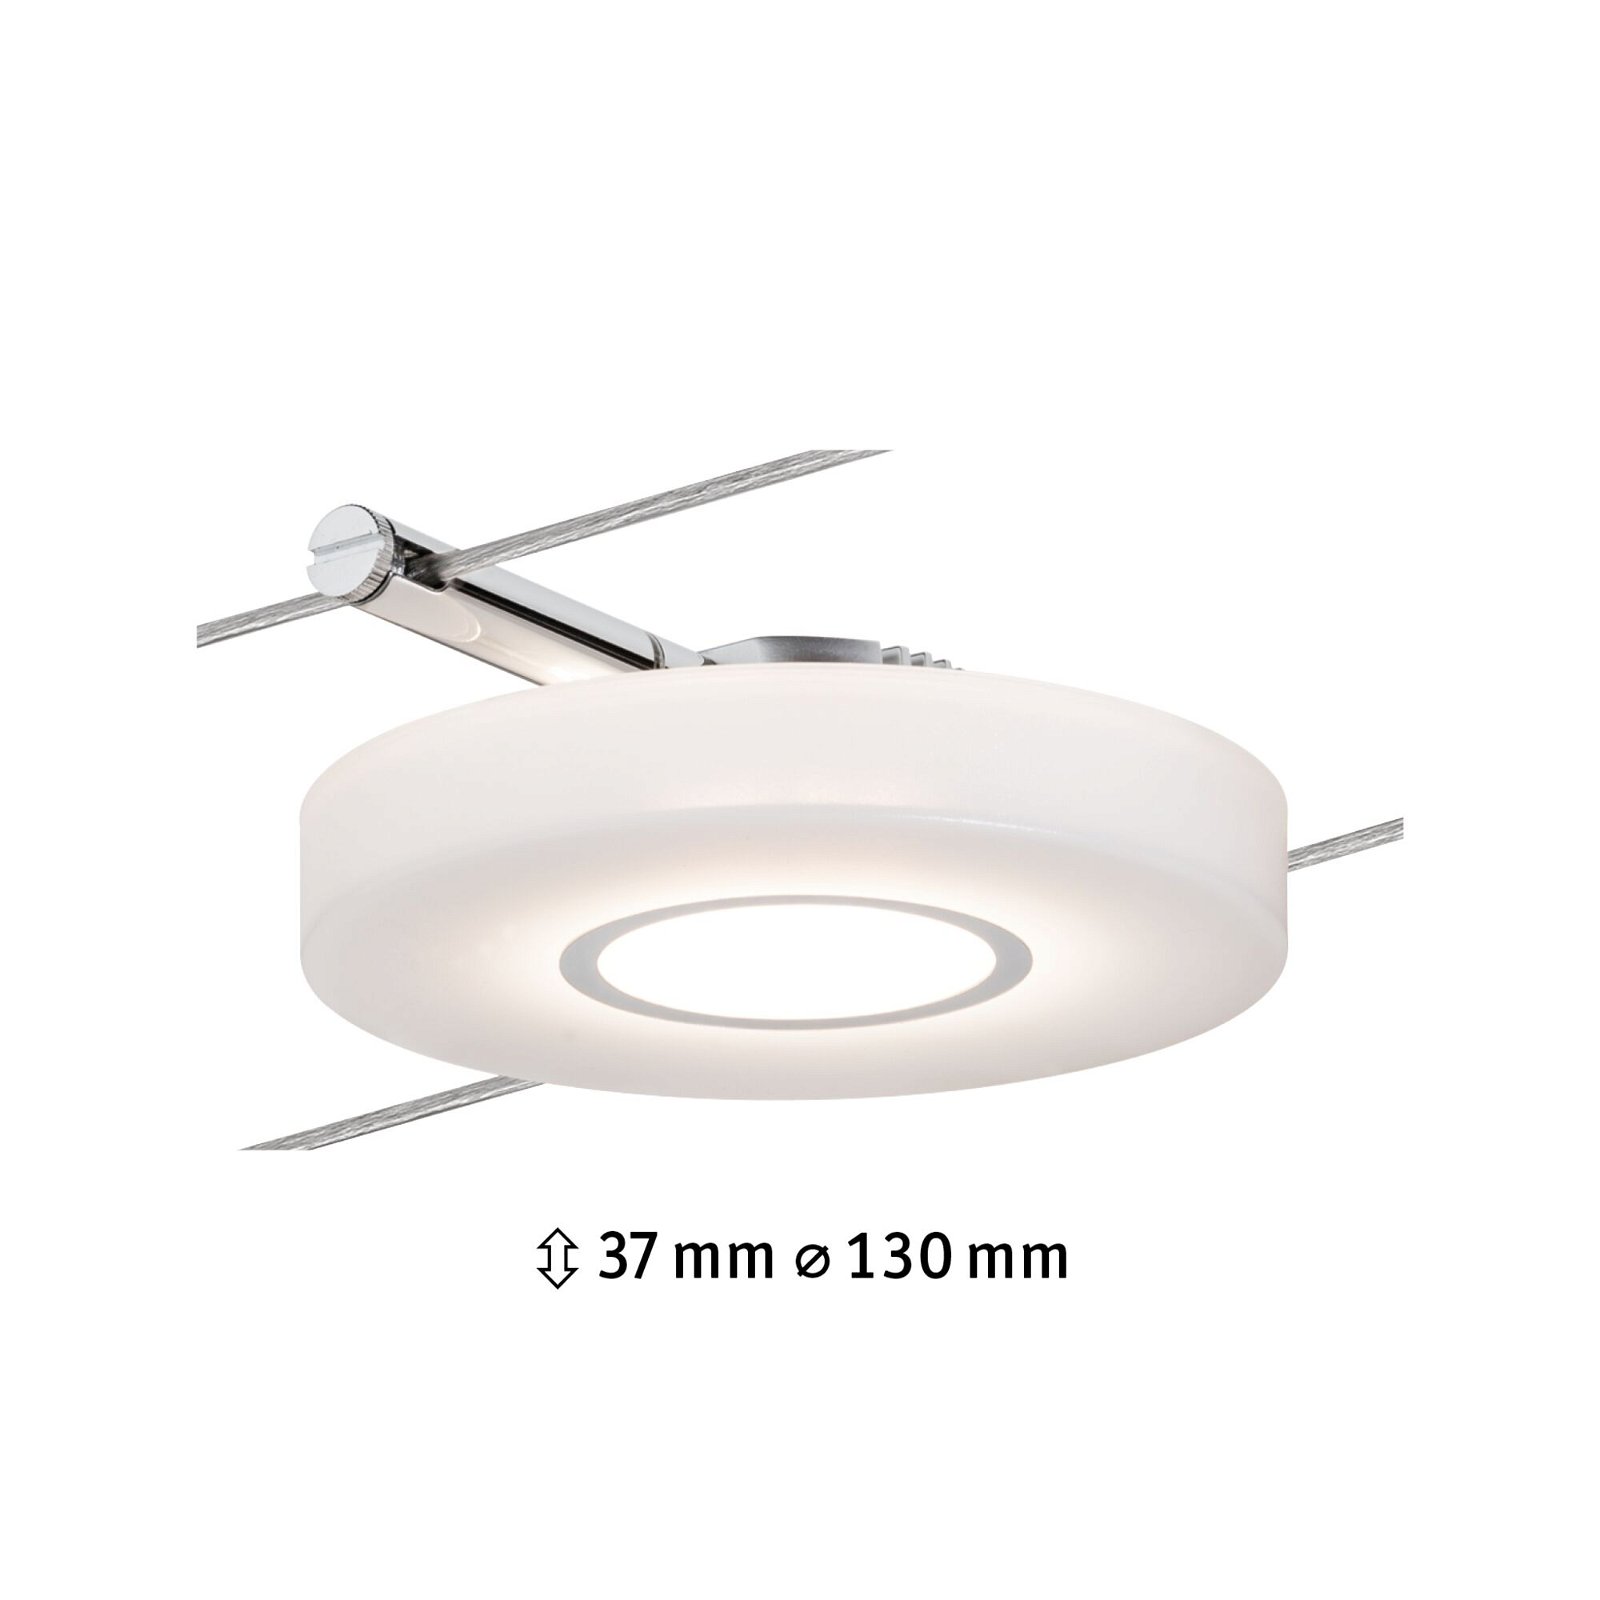 LED Cable system Smart Home Bluetooth DiscLED I Individual Spot 320lm / 420lm 4,4W Tunable White dimmable 12V Satin